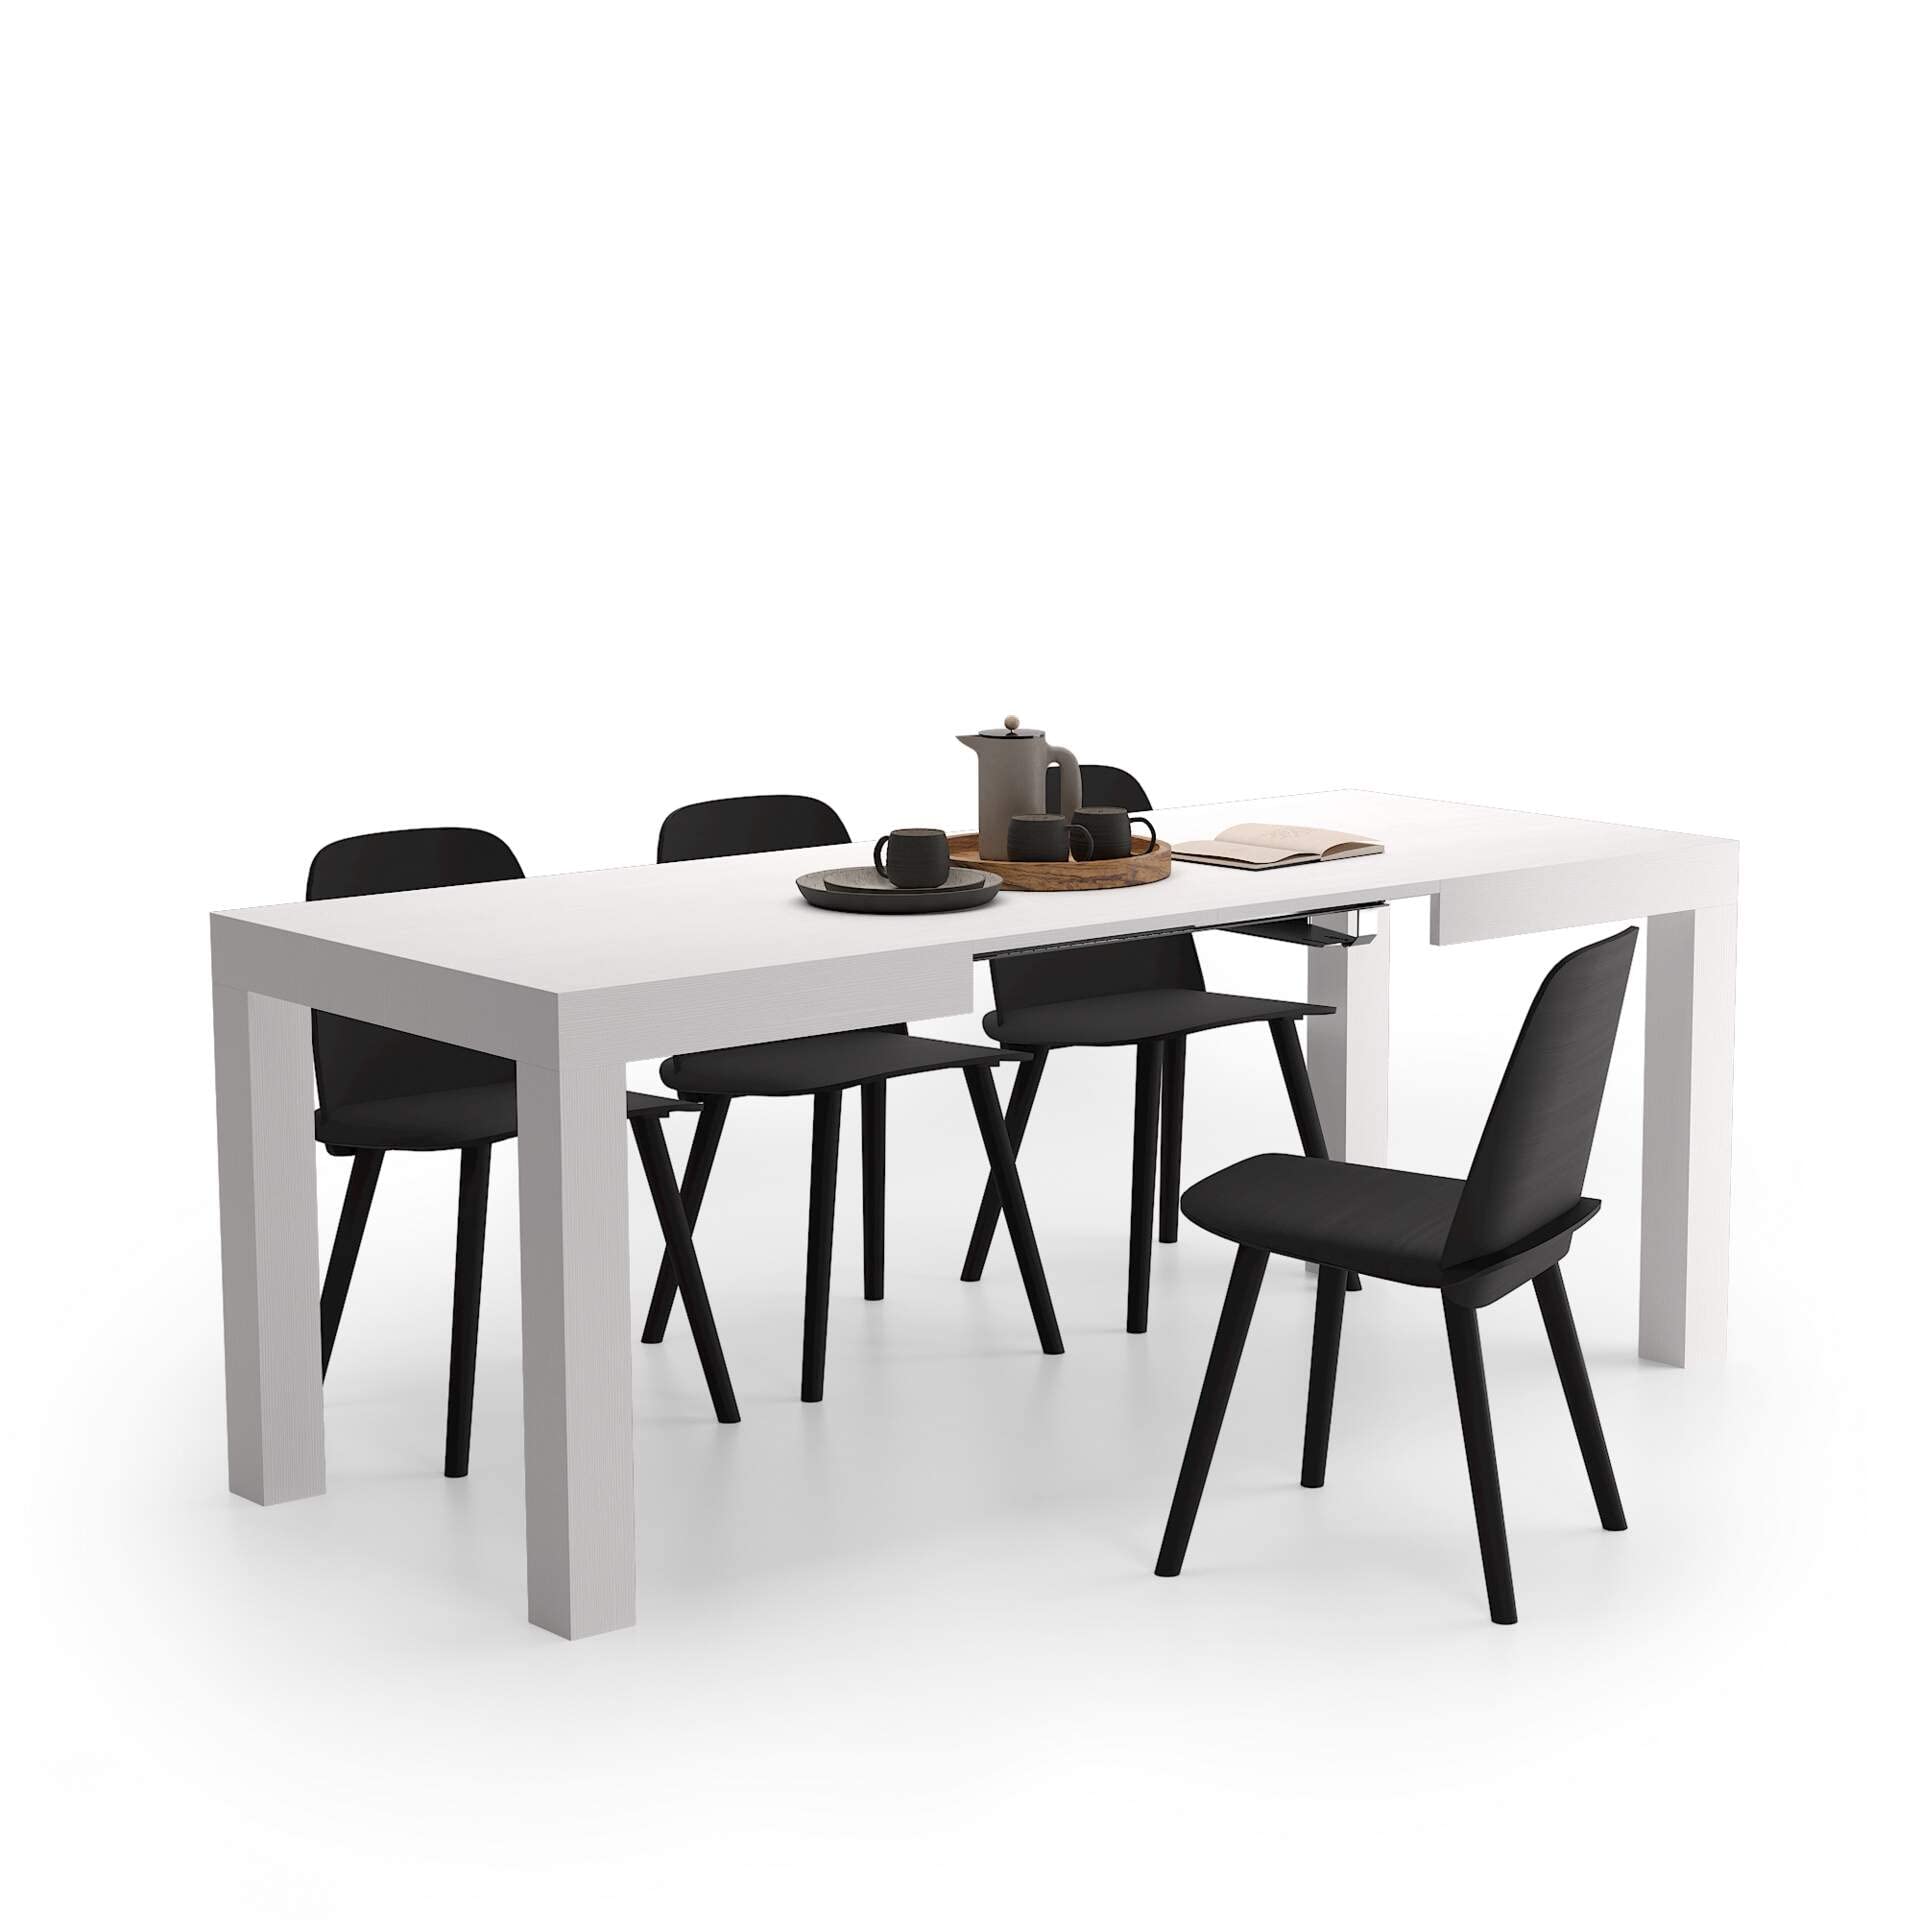 Mobili Fiver, First Extendable Table, Ashwood White, Made in Italy